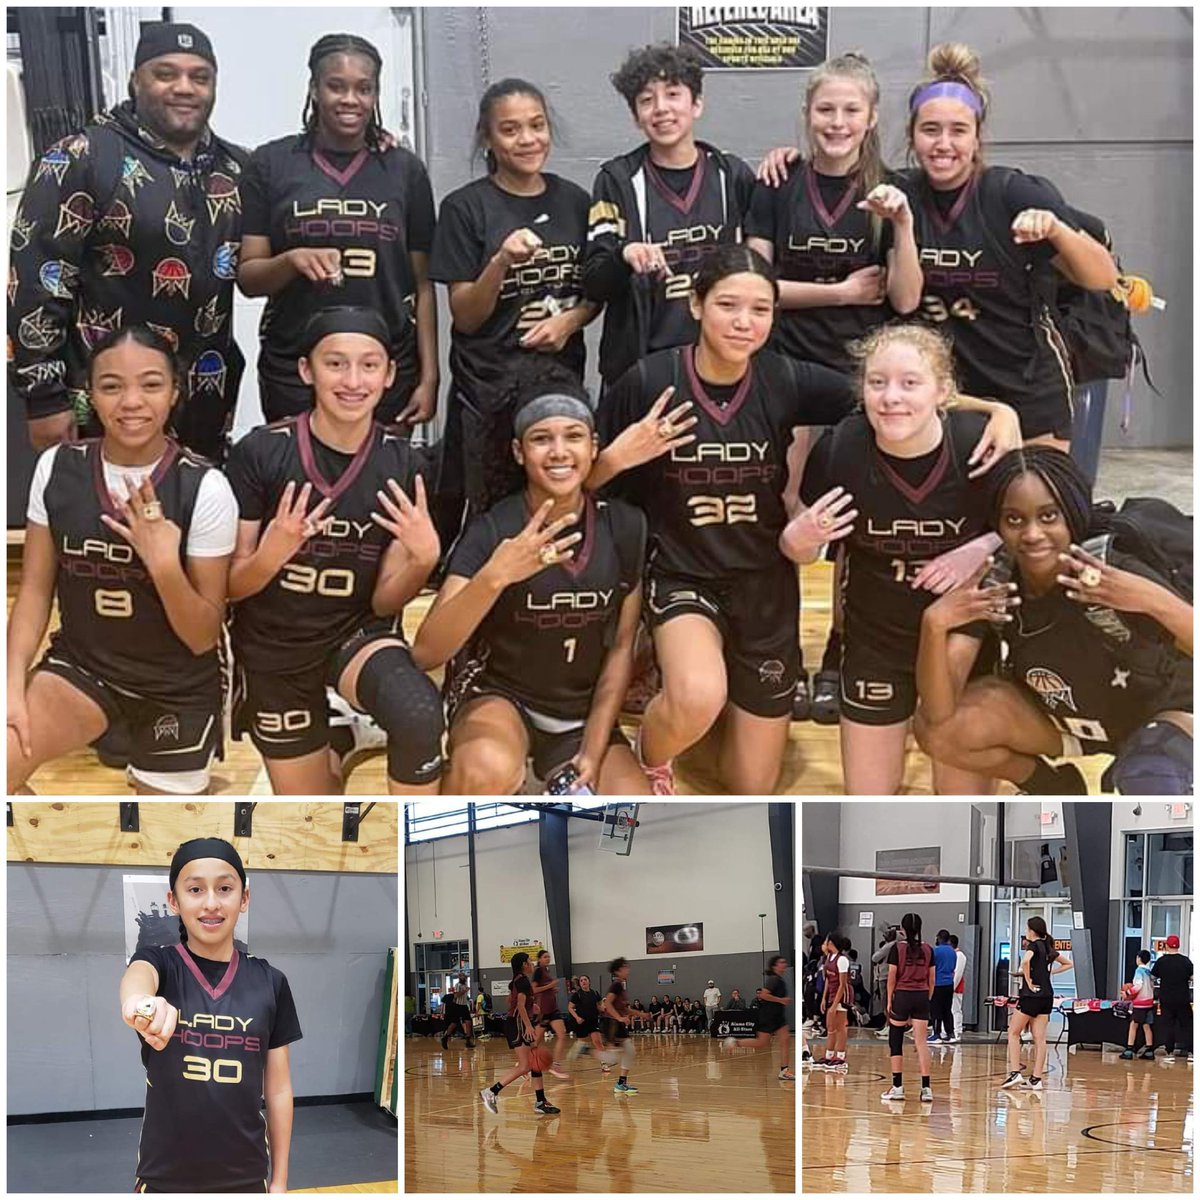 Lady Hoops 2026 Maroon (8th grade and one 7th grader, yours truly @Amariah2027) brought home the Championship in the HS JV Division today. These ladies played awesome team ball on both sides of the ball today. @SALadyHoops @FloresvilleB